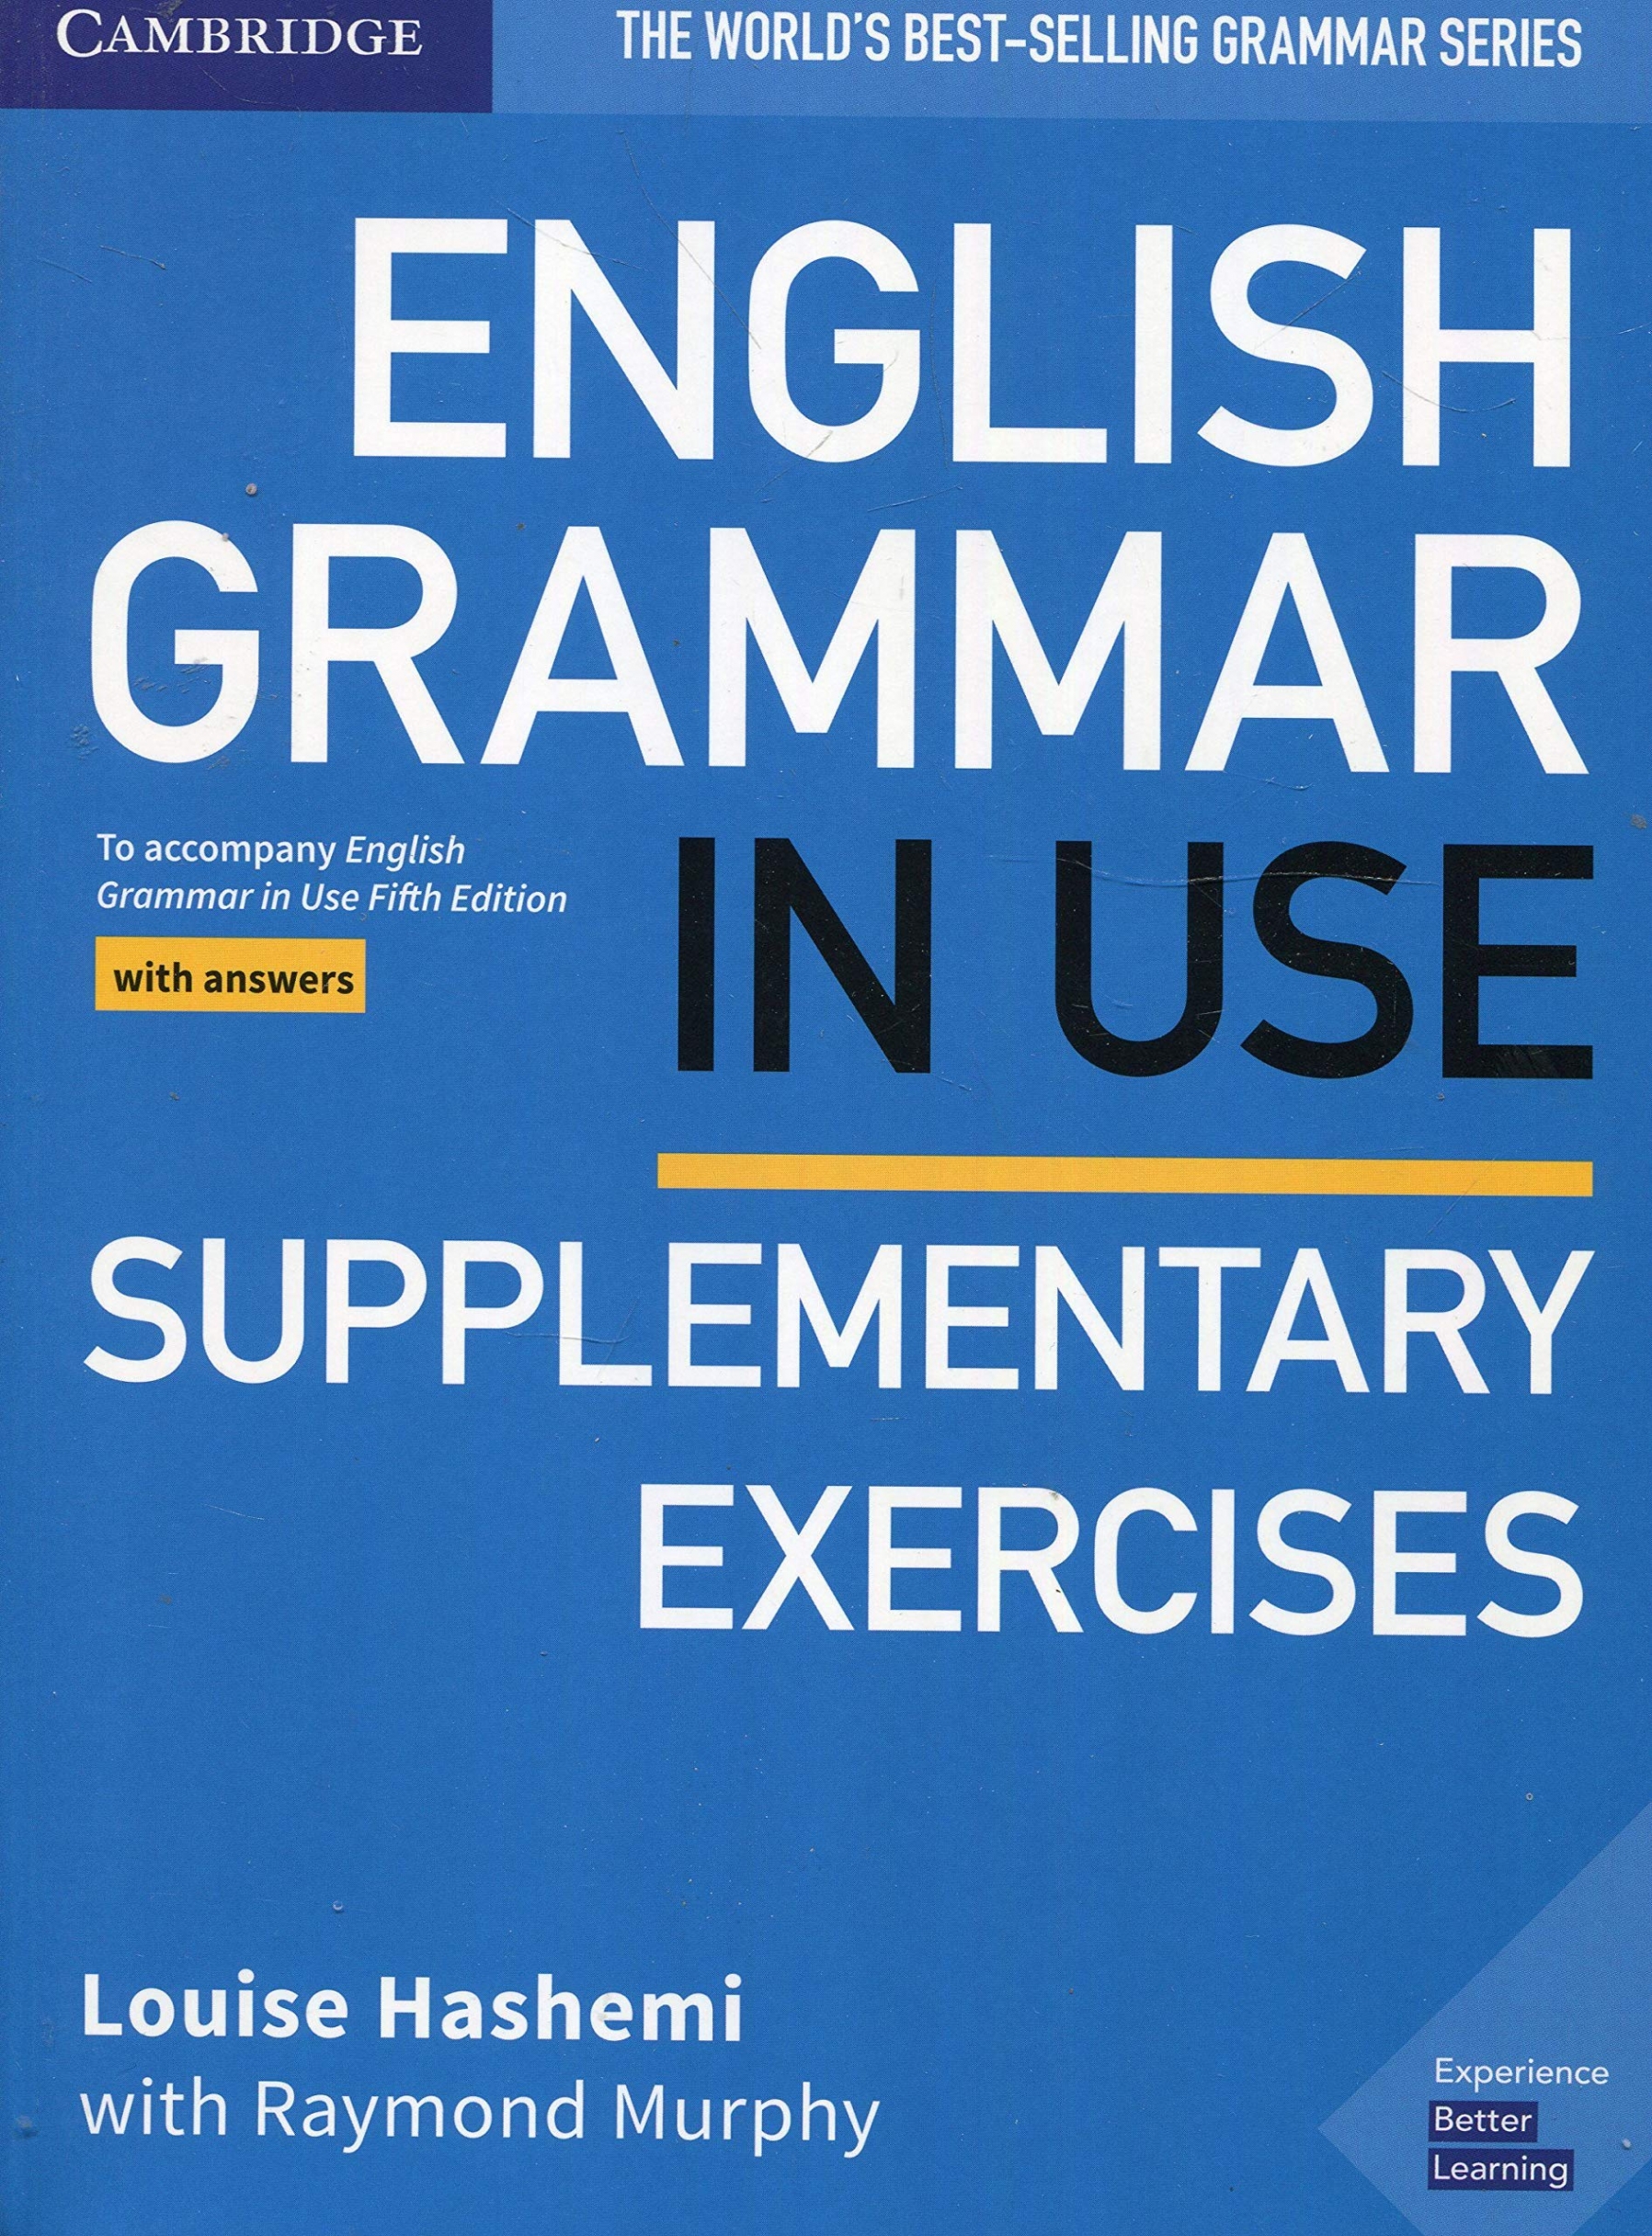 Louise Hashemi English Grammar in Use Supplementary Exercises Book with Answers: To Accompany English Grammar in Use Fifth Edition.- Cambridge University Press, 2019 